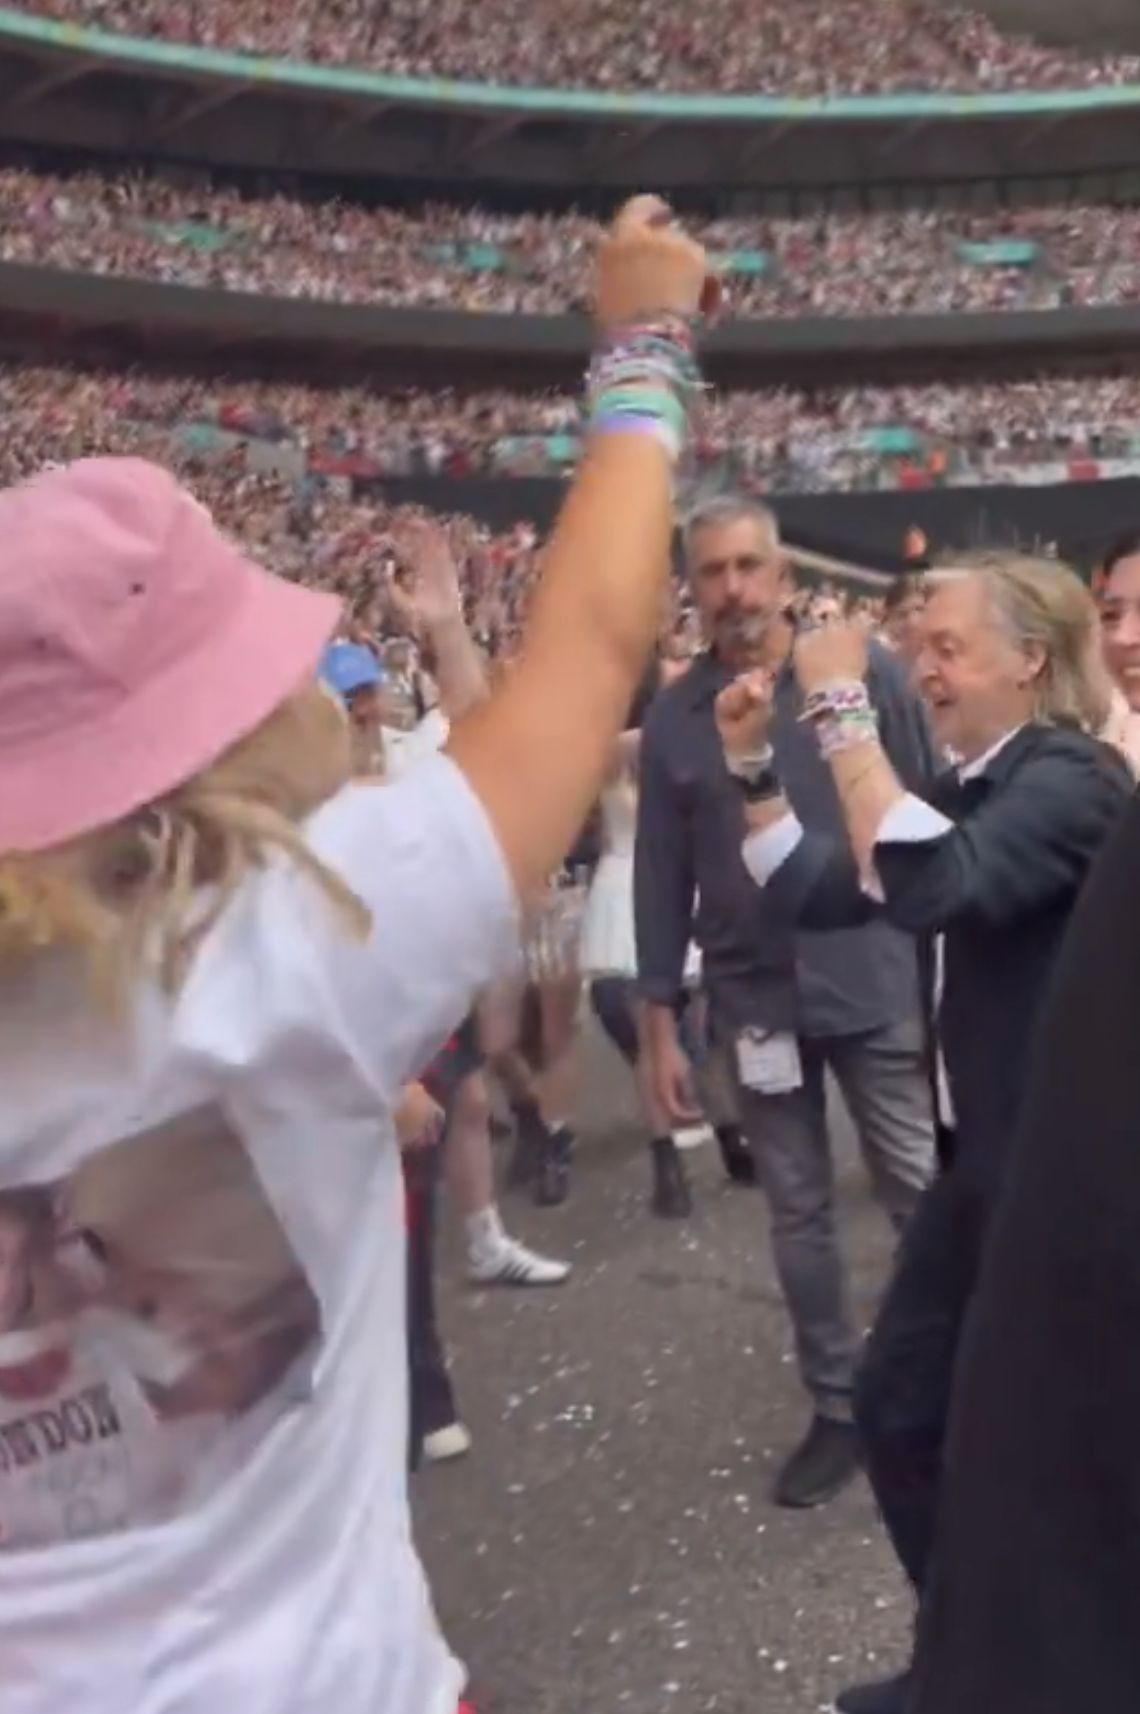 Paul McCartney is greeted and celebrated by excited fans at a concert, with a woman in the foreground wearing a hat and many bracelets